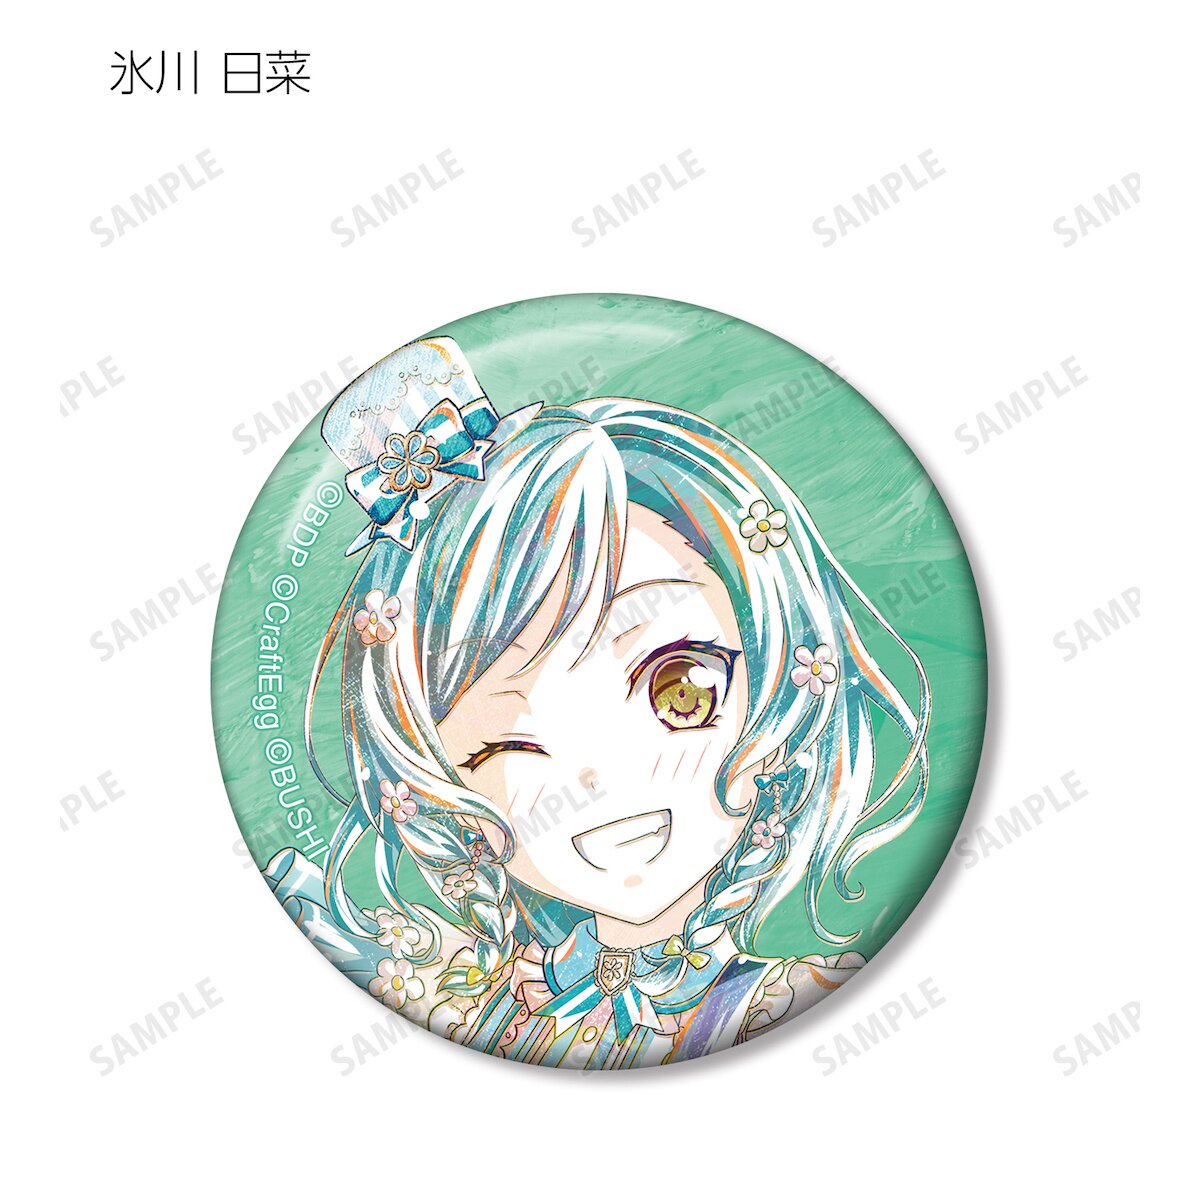  Taiwan Anime Events Limited Edition BanG Dream! Can Badge  Morphonica Mashiro : Toys & Games